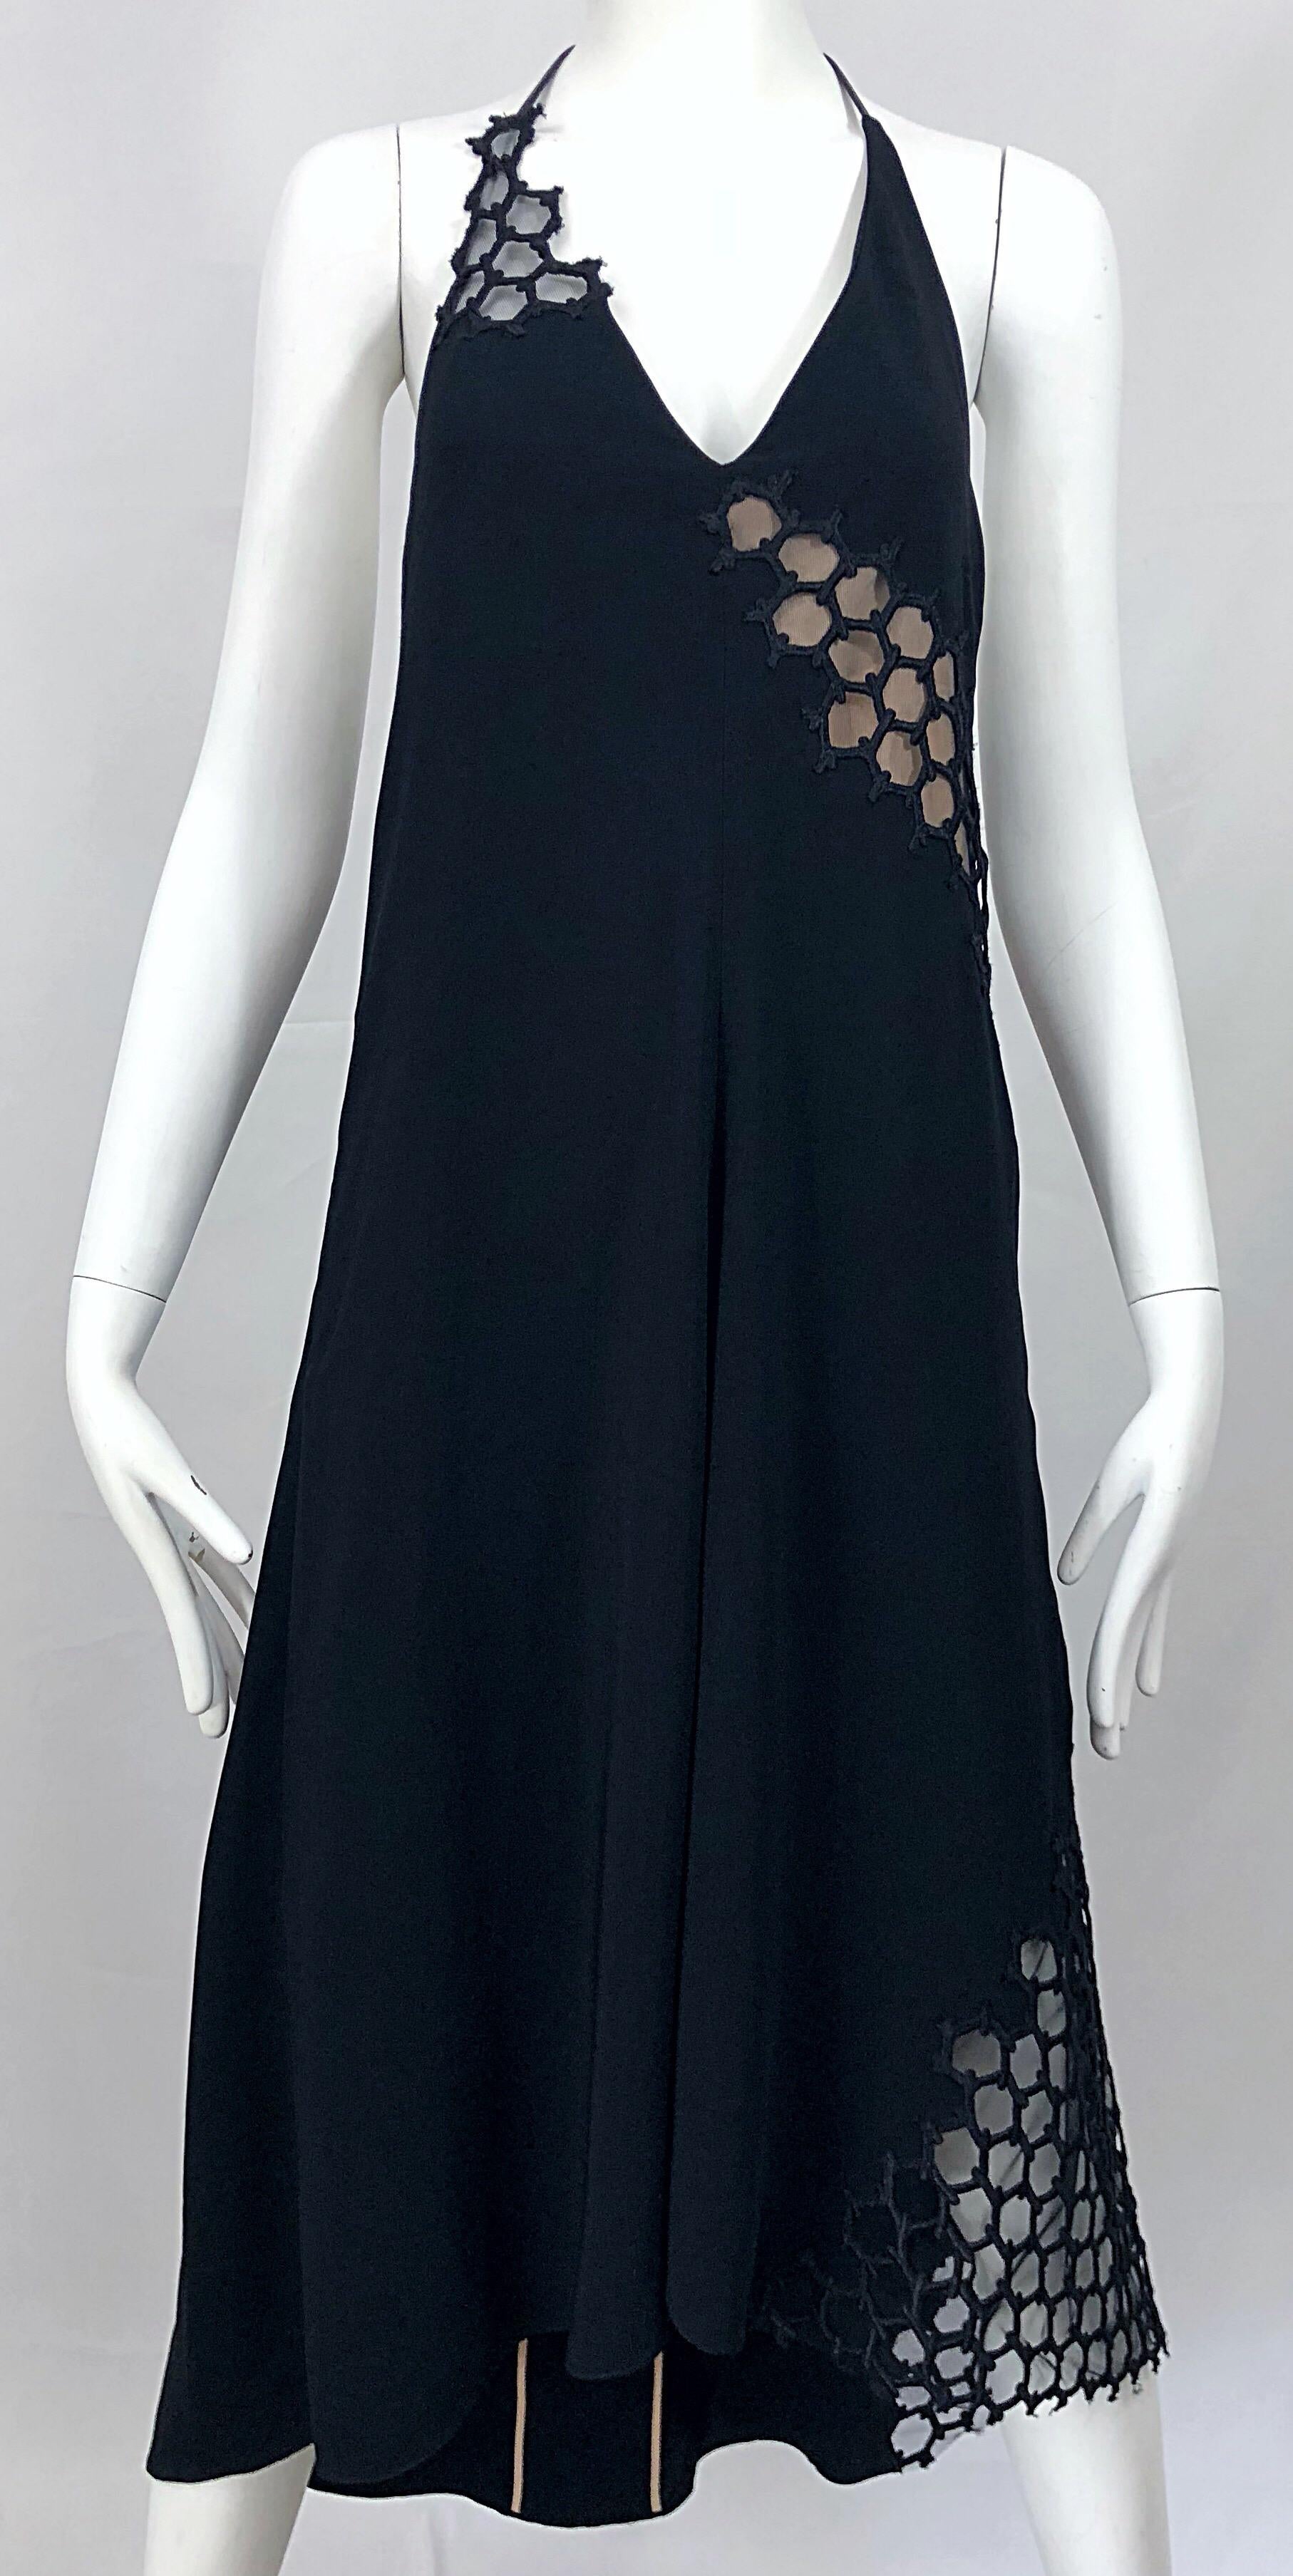 Reed Krakoff Spring 2015 Runway Size 2 / 4 Black Nude Cut Out Halter Dress For Sale 6